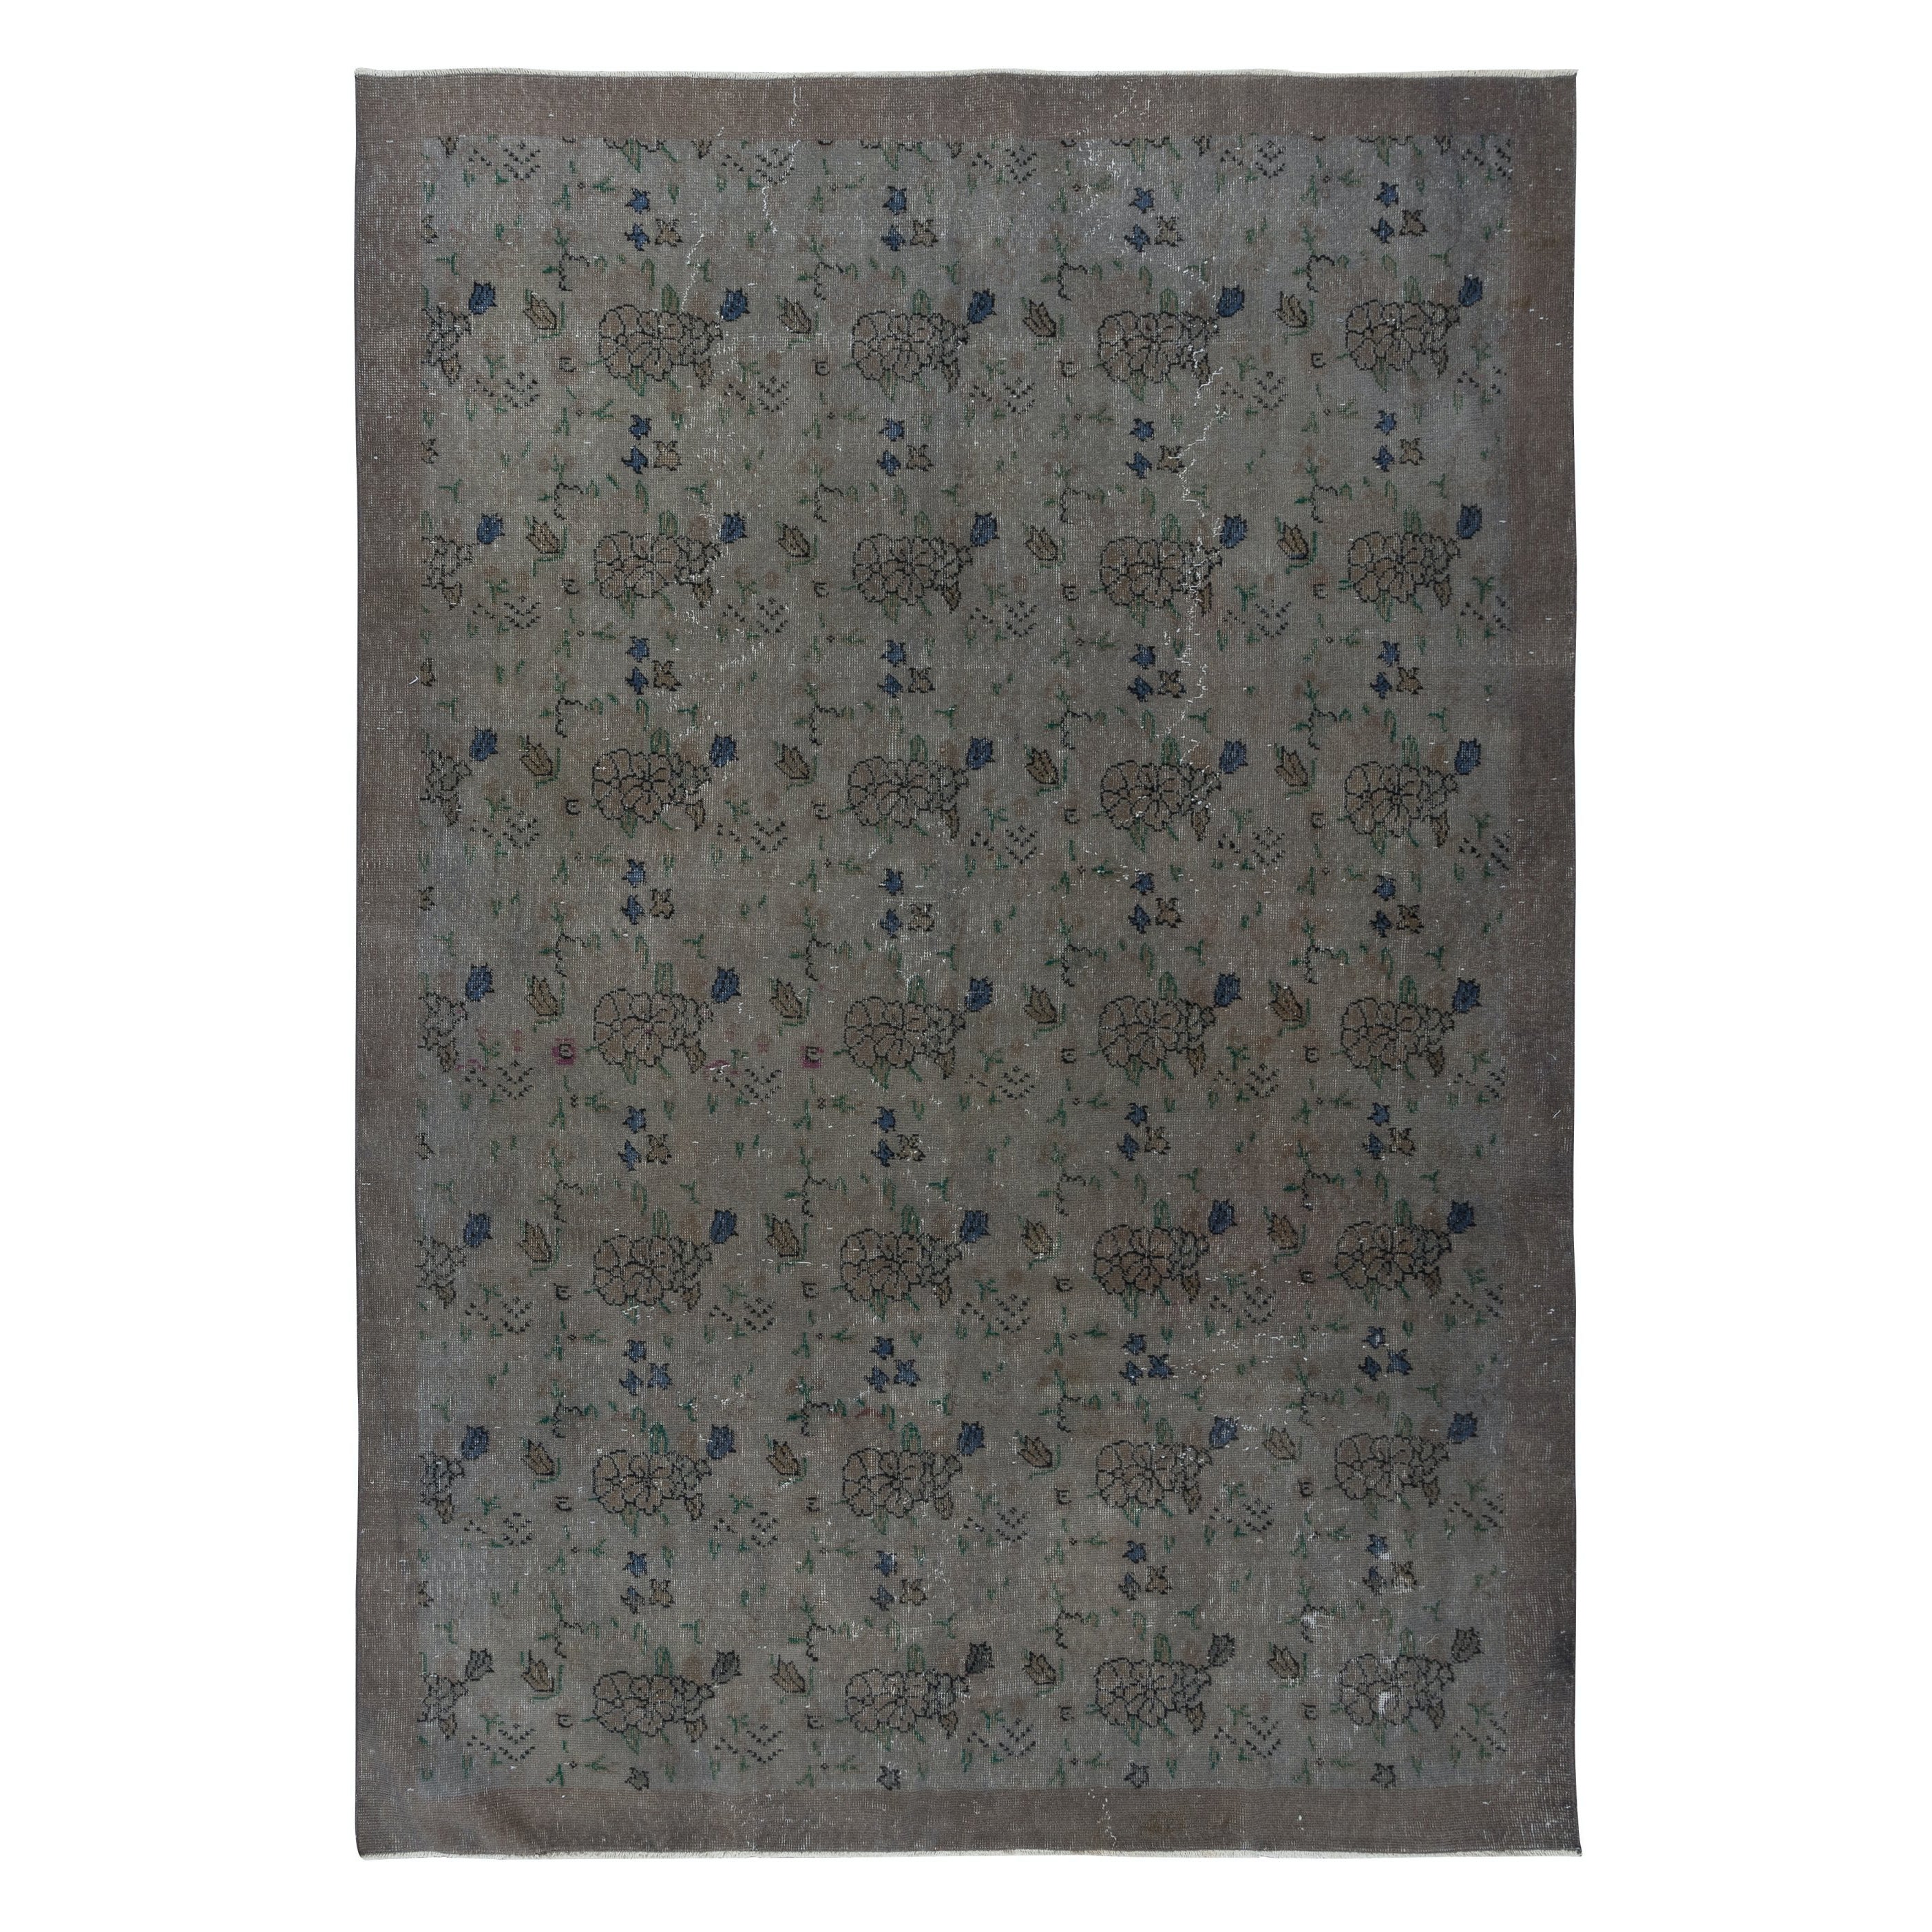 6.6x9.2 Ft Modern Handmade Turkish Area Rug with Gray, Light Brown and Brown For Sale